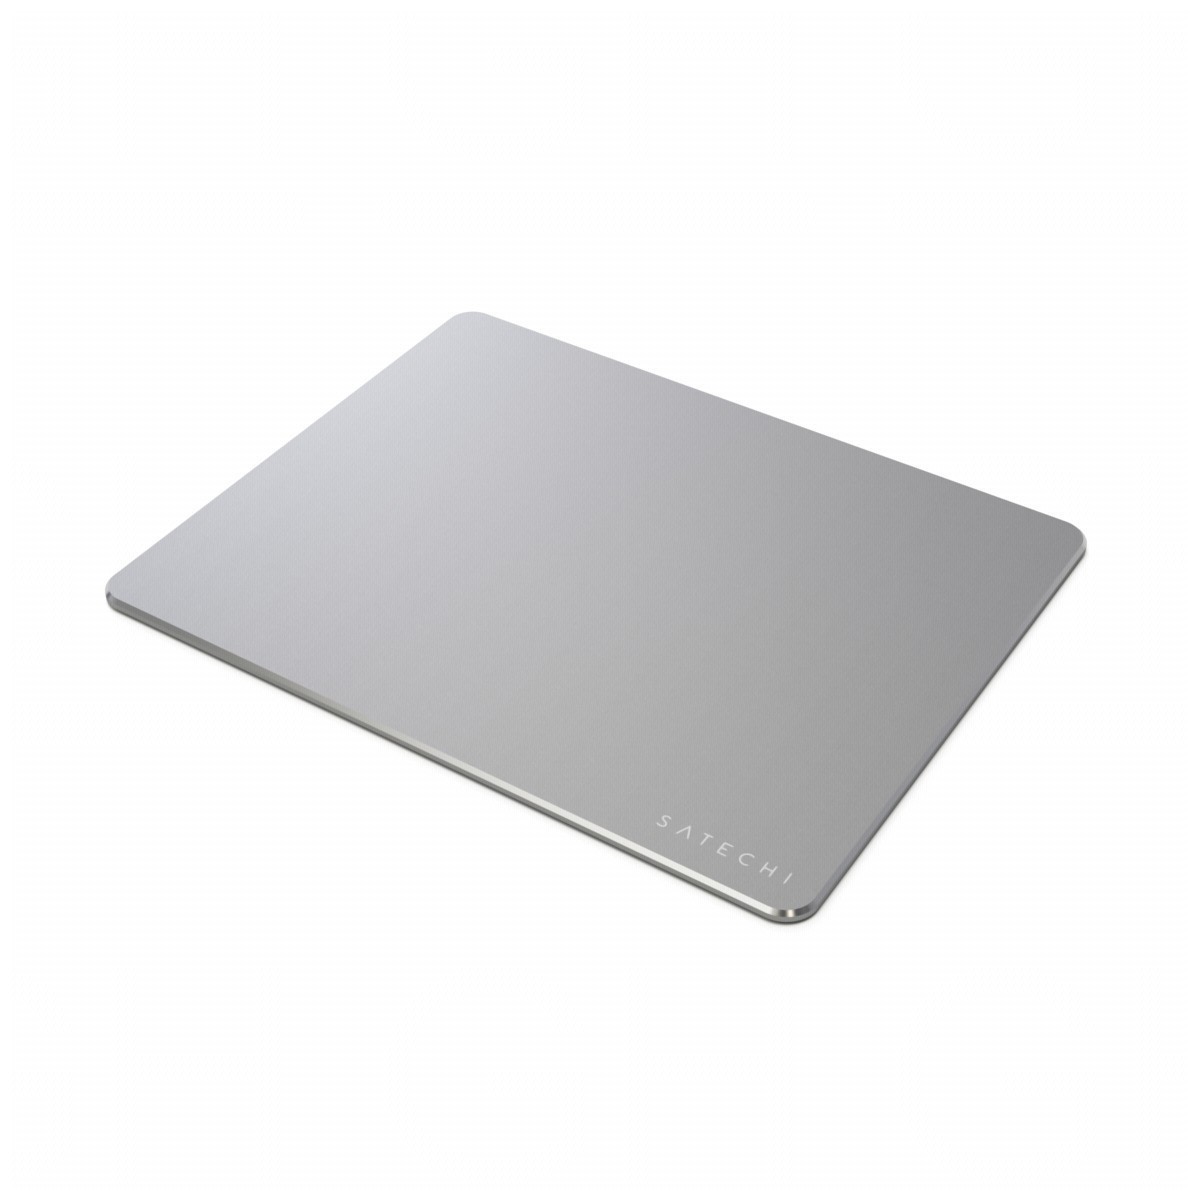 Satechi Aluminum Mouse Pad Space gray